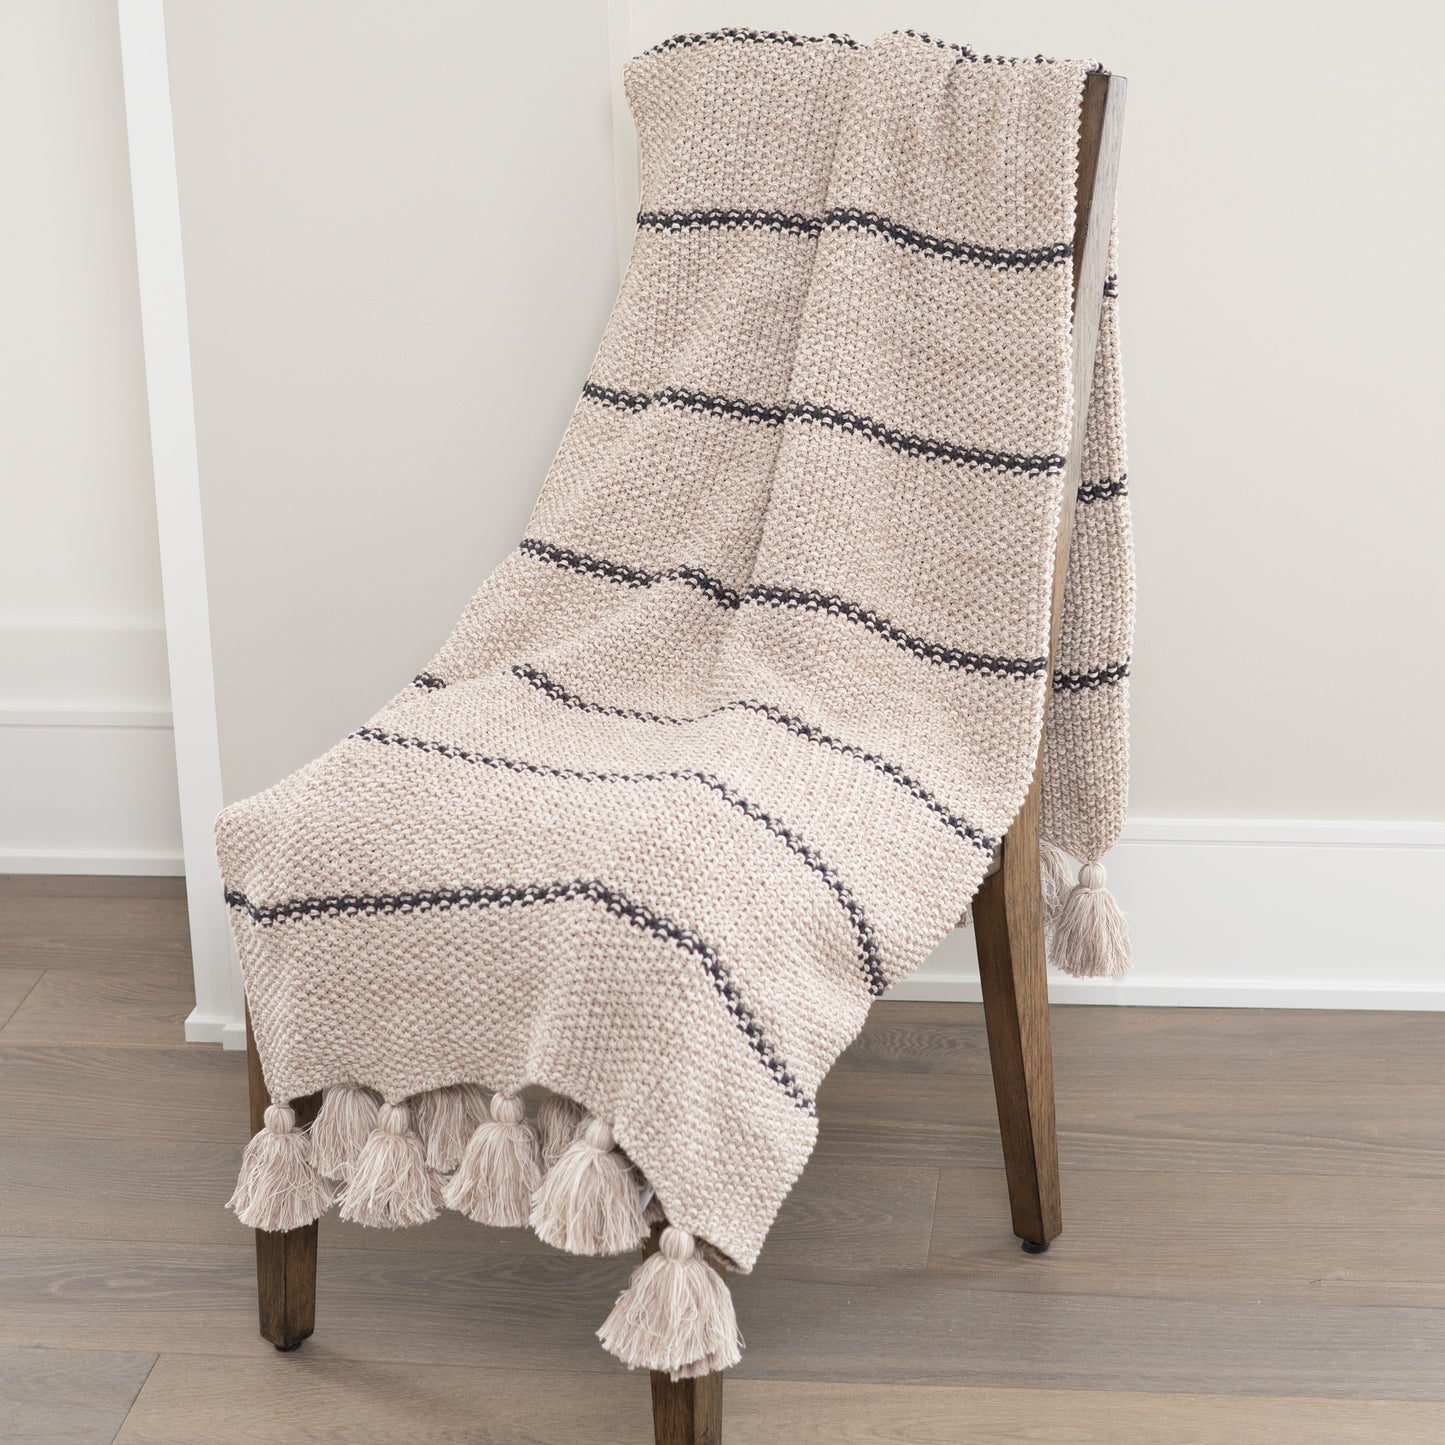 Elin 50x60" Recycled Cotton Sweater Knit Decorative Throw Blanket